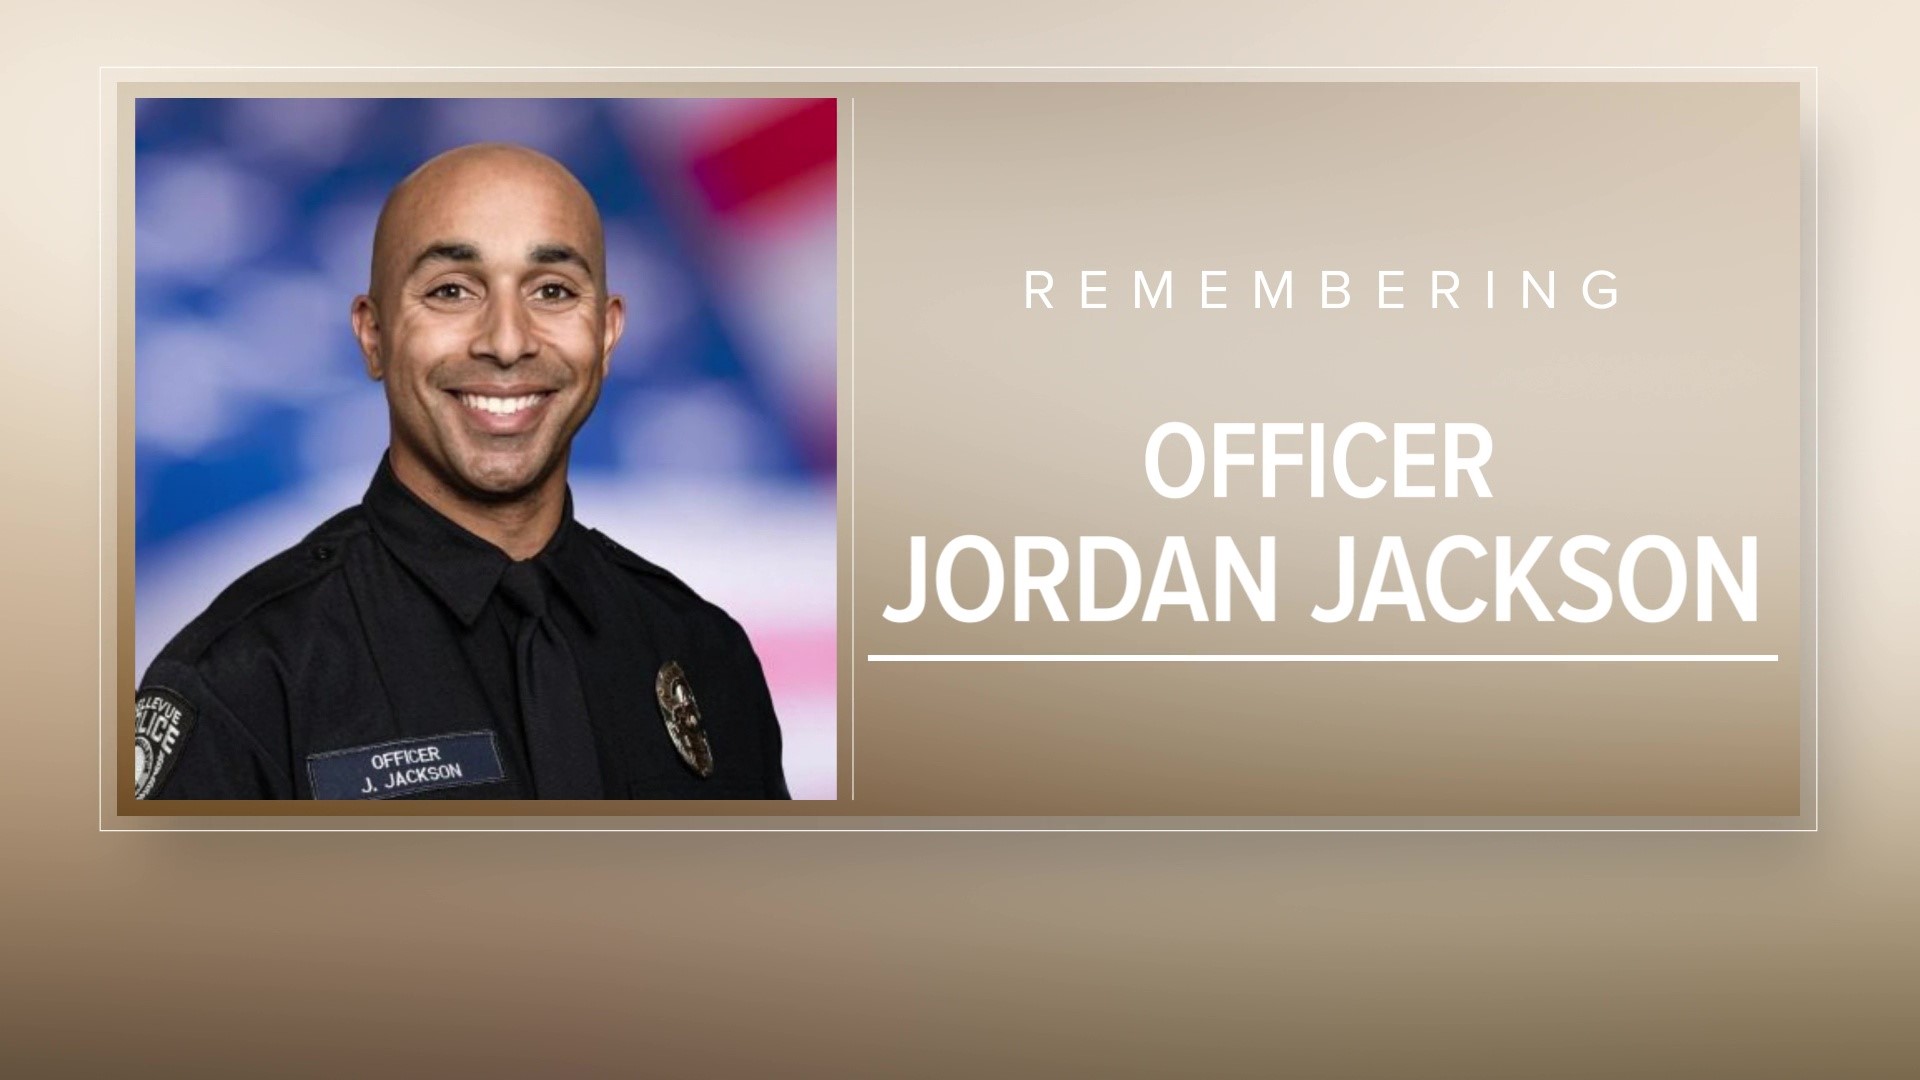 Officer Jackson passed away from injuries sustained in a crash while on duty in Bellevue on November 21st